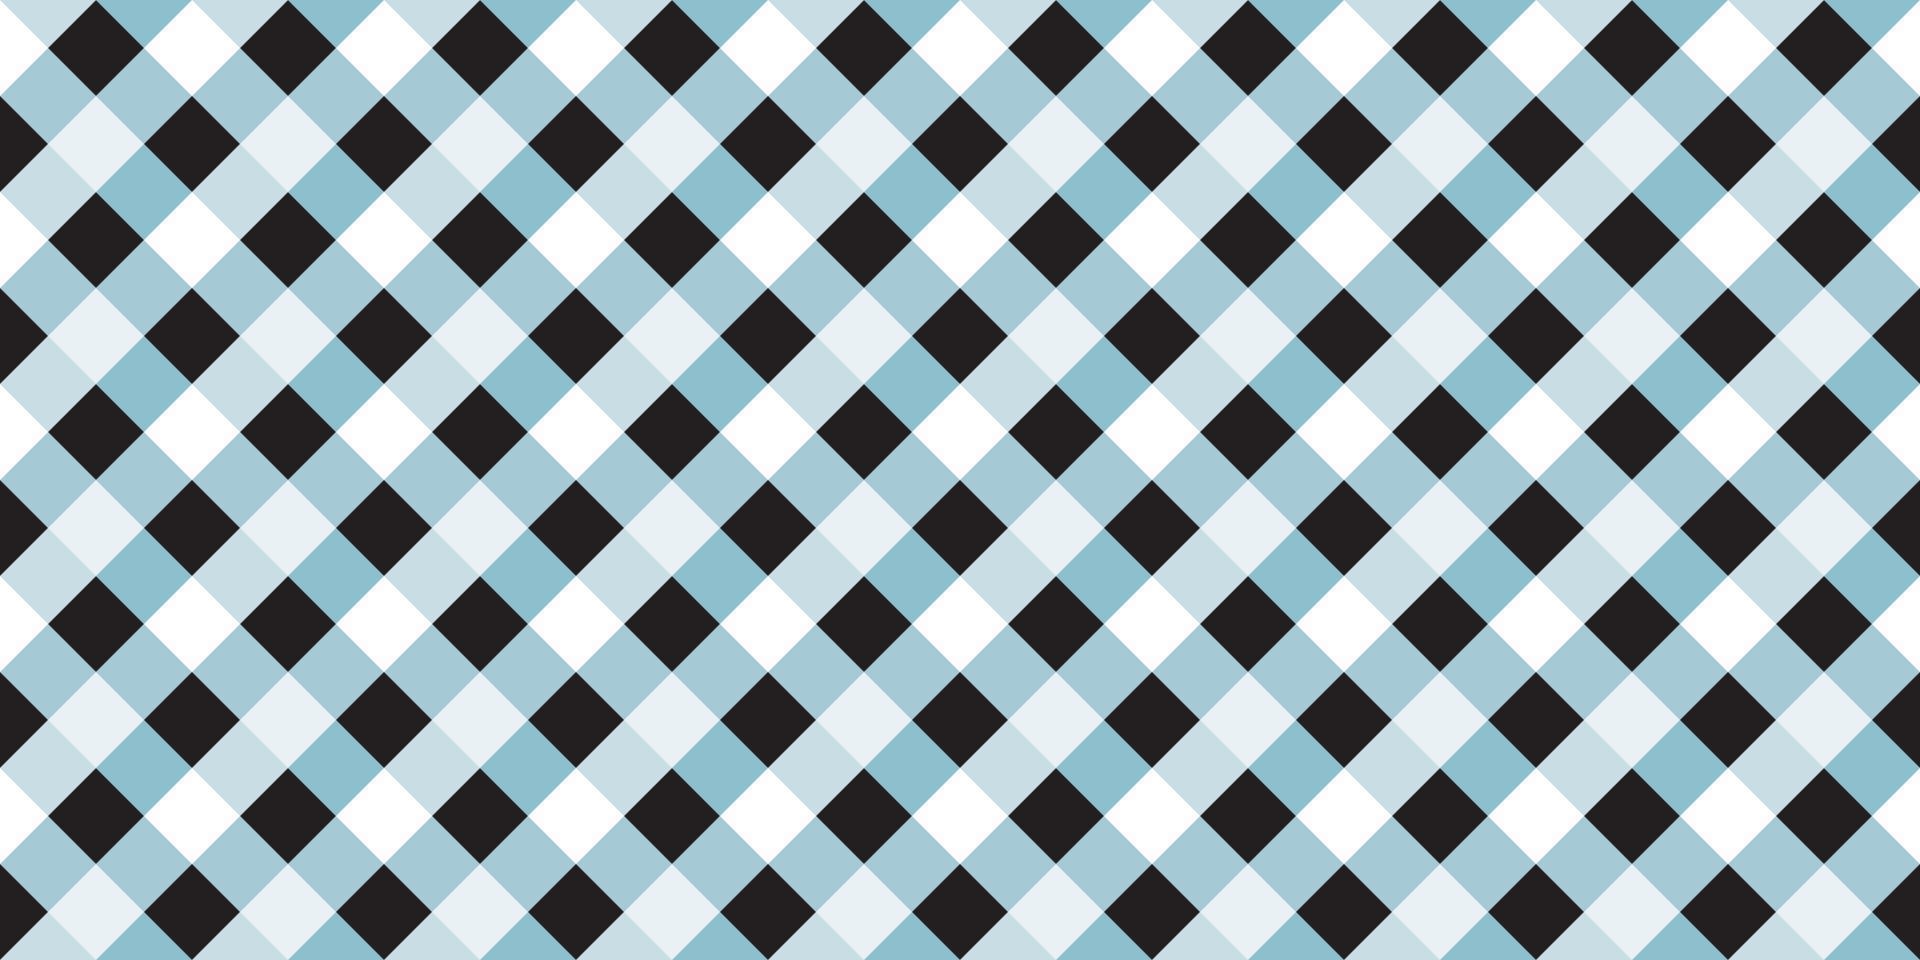 Checkered black and blue seamless repeat pattern background vector